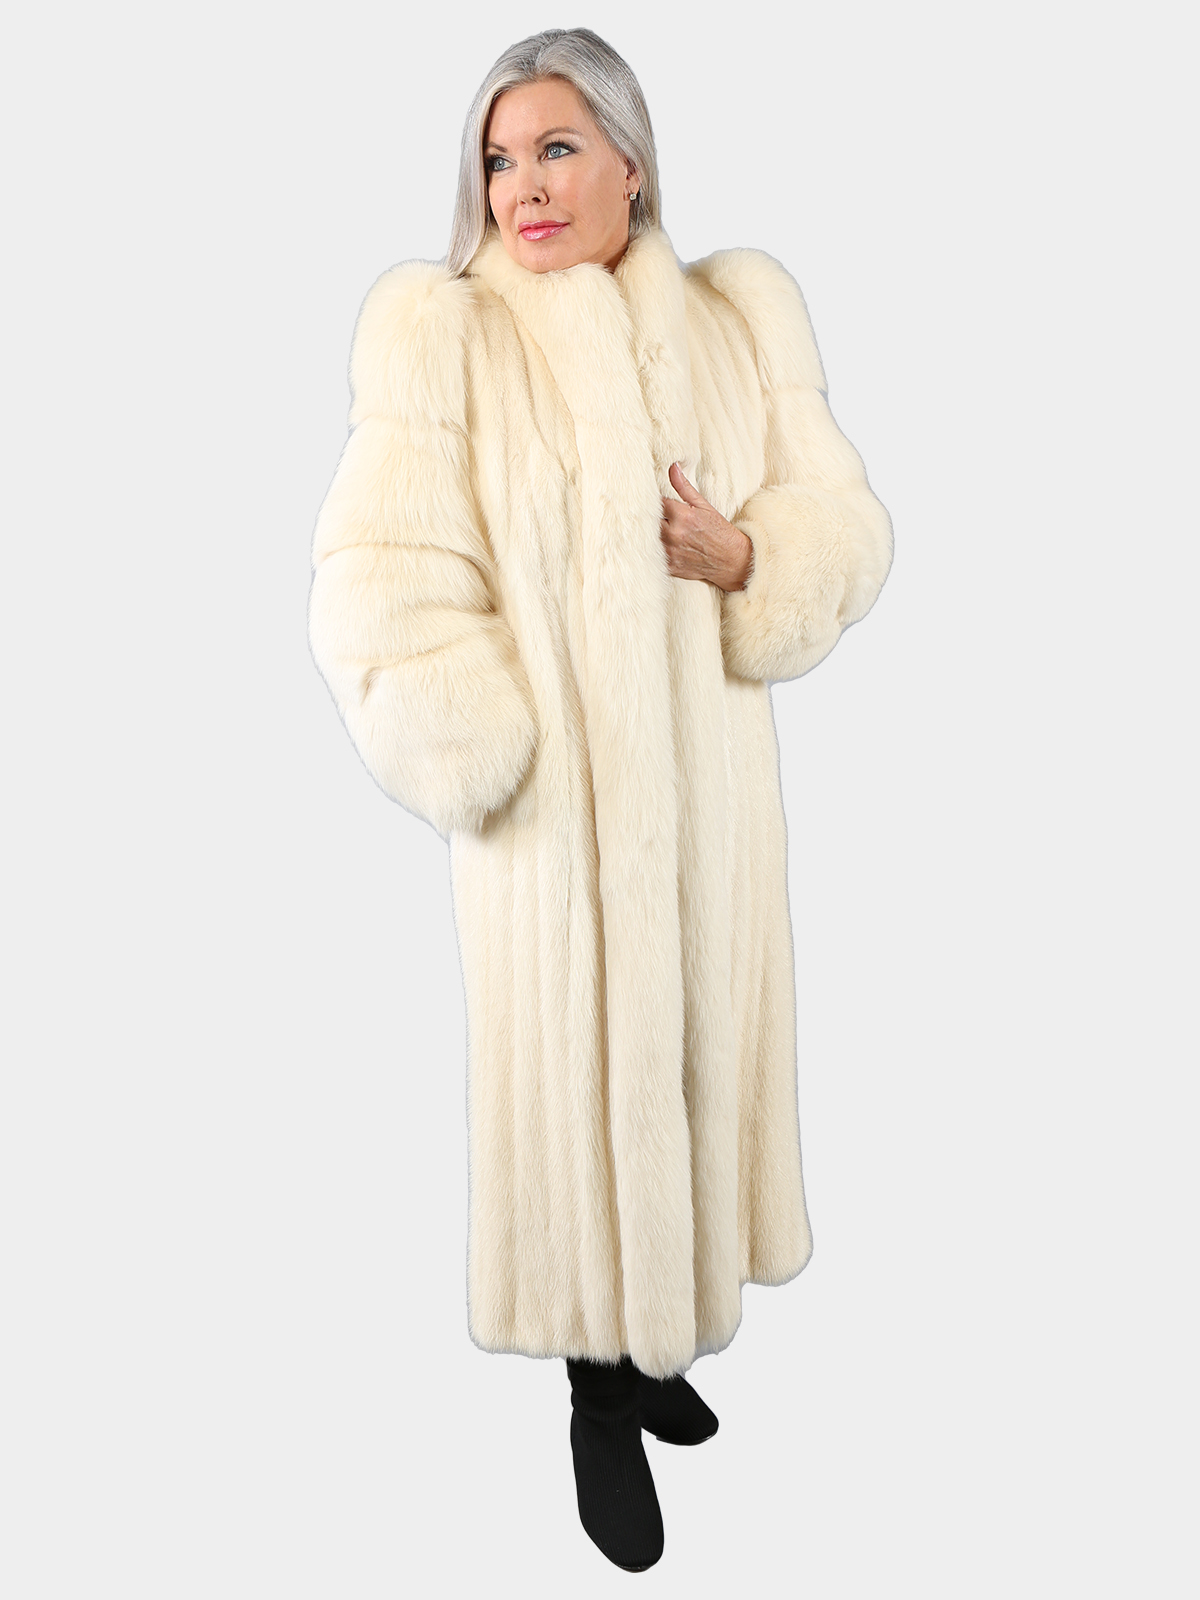 Woman's Plus Size Mahogany and Ranch Mink Fur Bomber Jacket